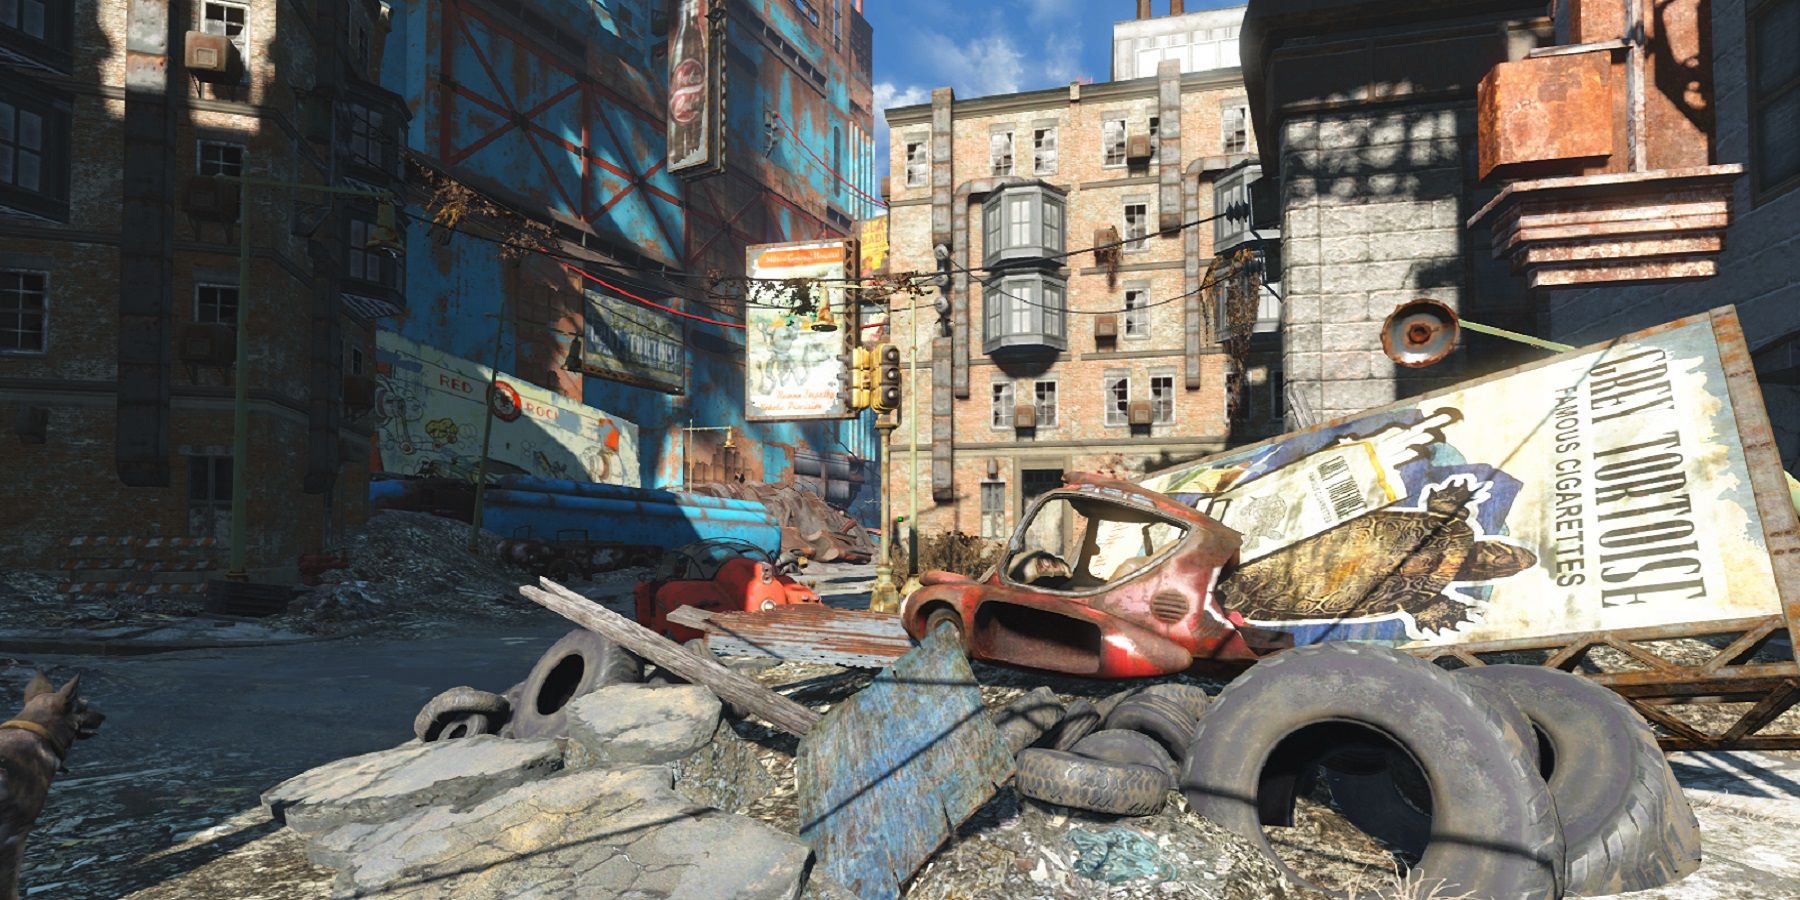 Detailed image from Fallout 4 showing a delapidated street.